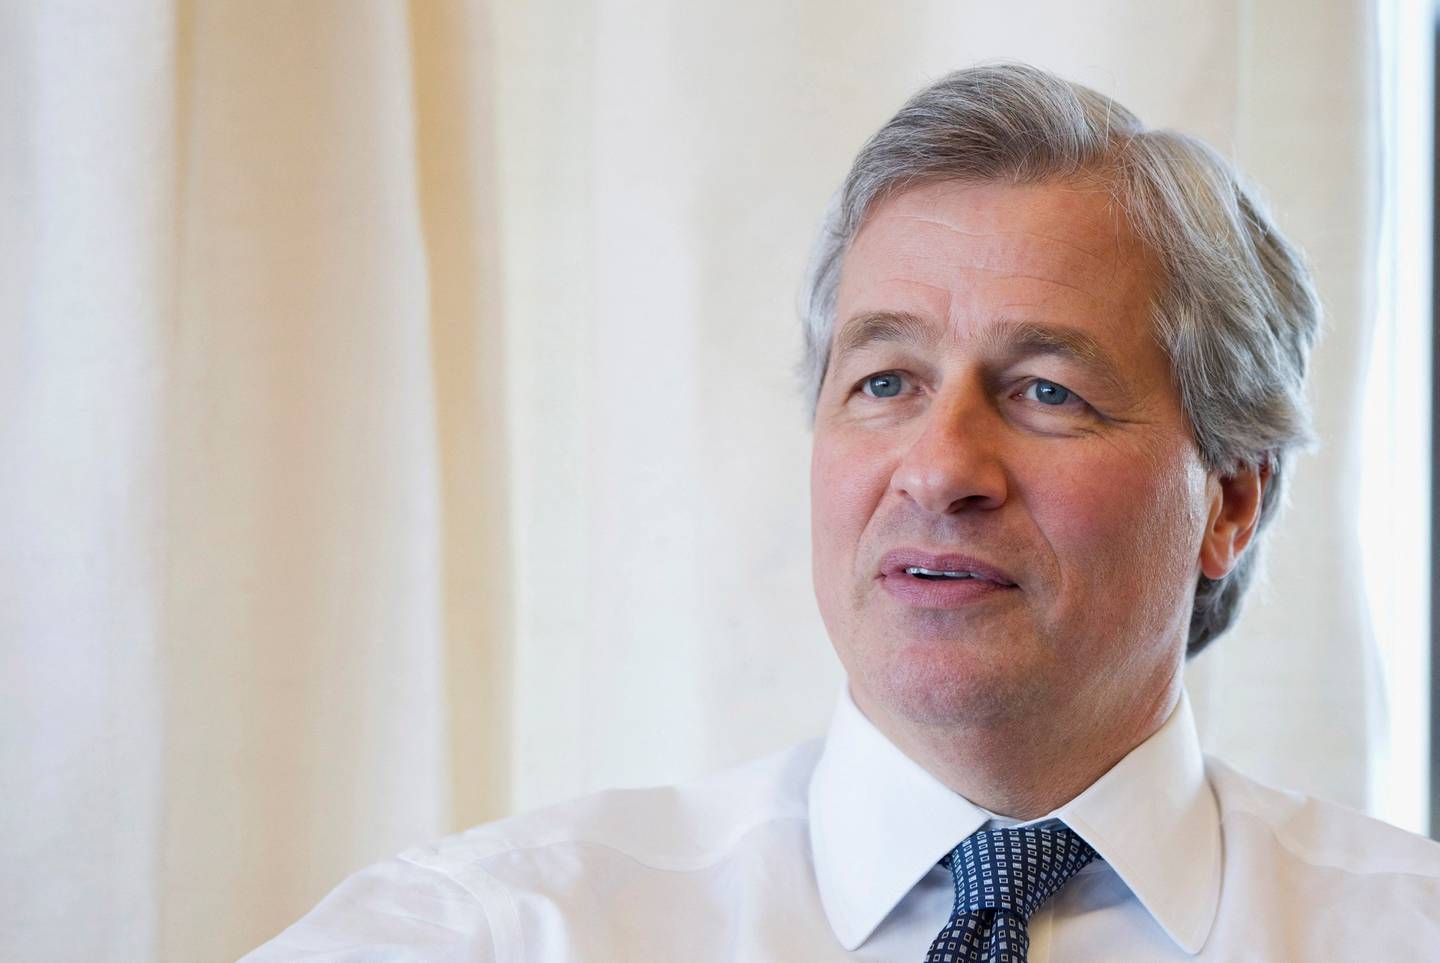 Jamie Dimon, chief executive and chairman of JP Morgan Chase, cautions on global economy. Reuters